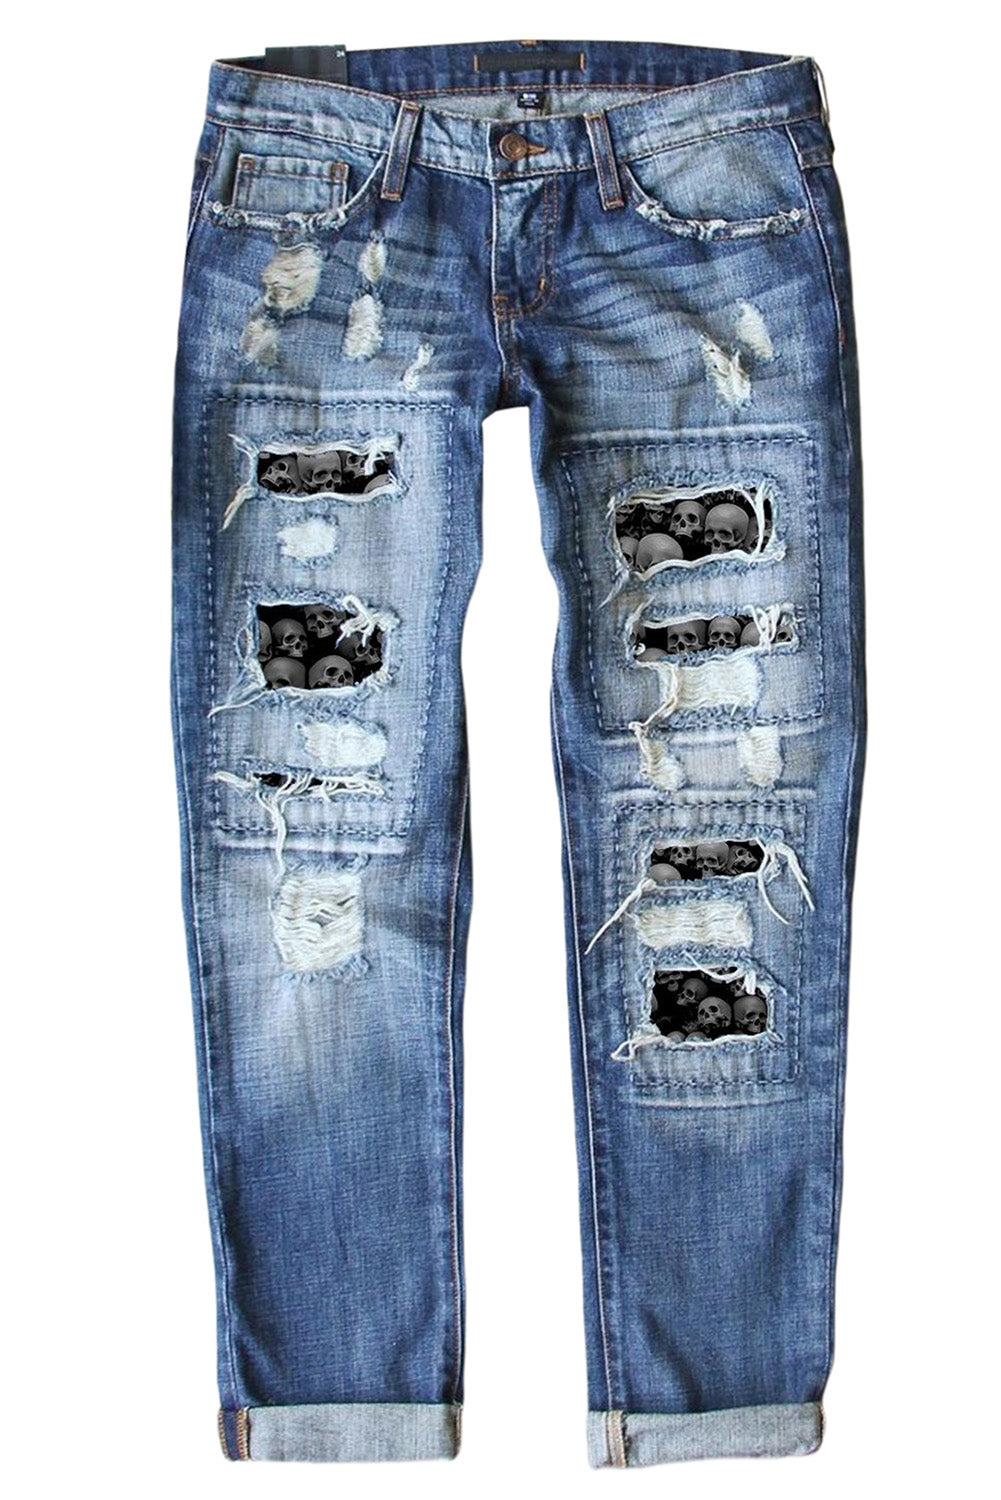 Sky Blue Womens Boyfriend Jeans Stretchy Ripped Skeleton Print Ripped Jeans LC787199-4